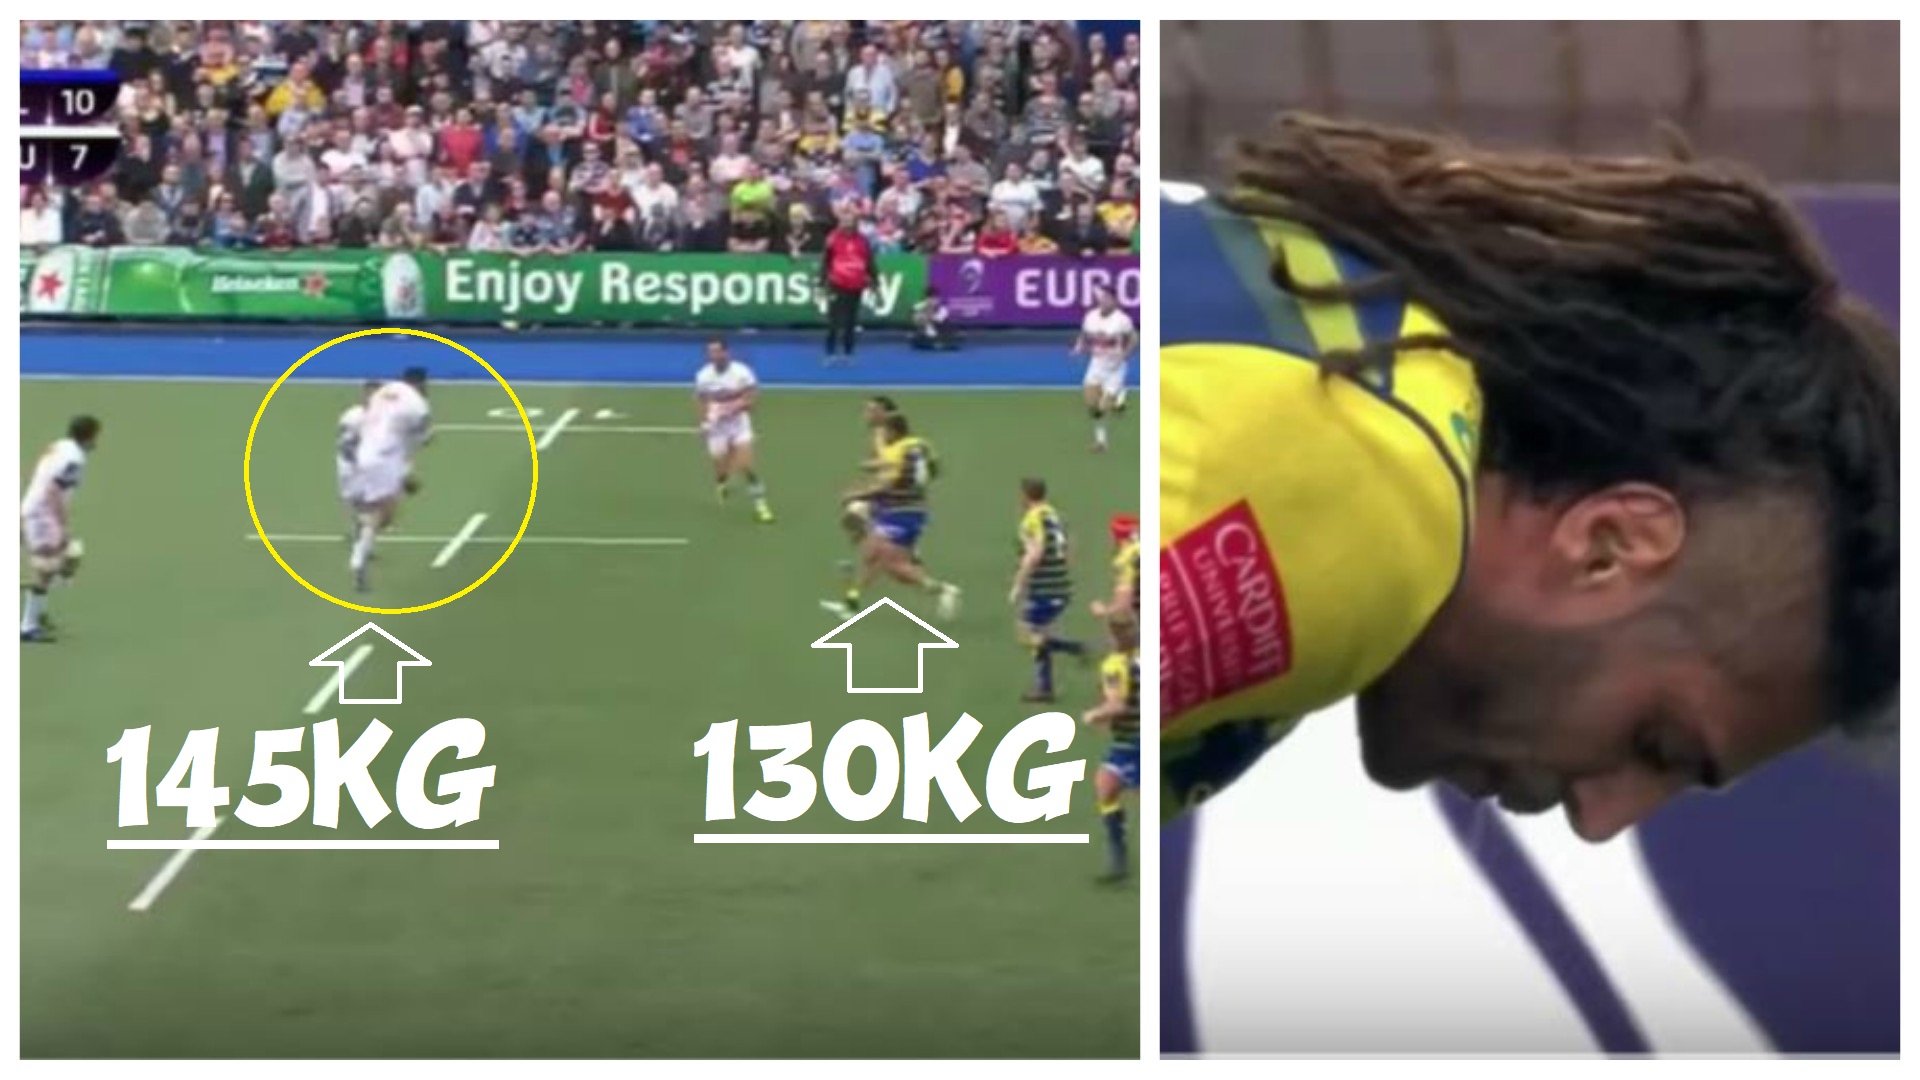 FOOTAGE: Josh Navidi absorbs hit from 145kg prop and 130kg backrow simultaneously